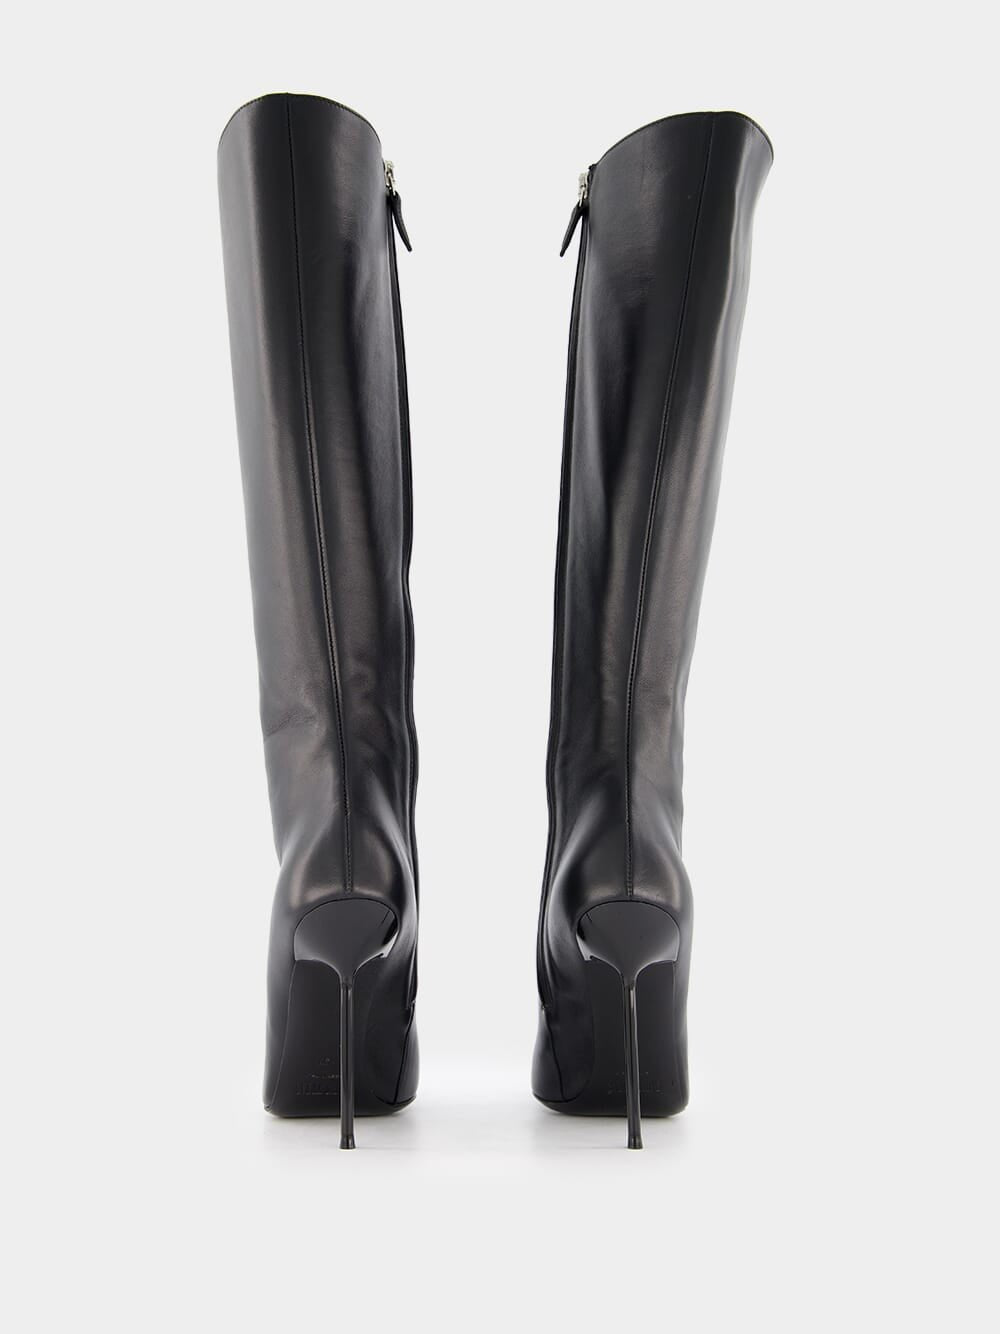 Paris TexasLidia 110mm Leather Stiletto Boots at Fashion Clinic